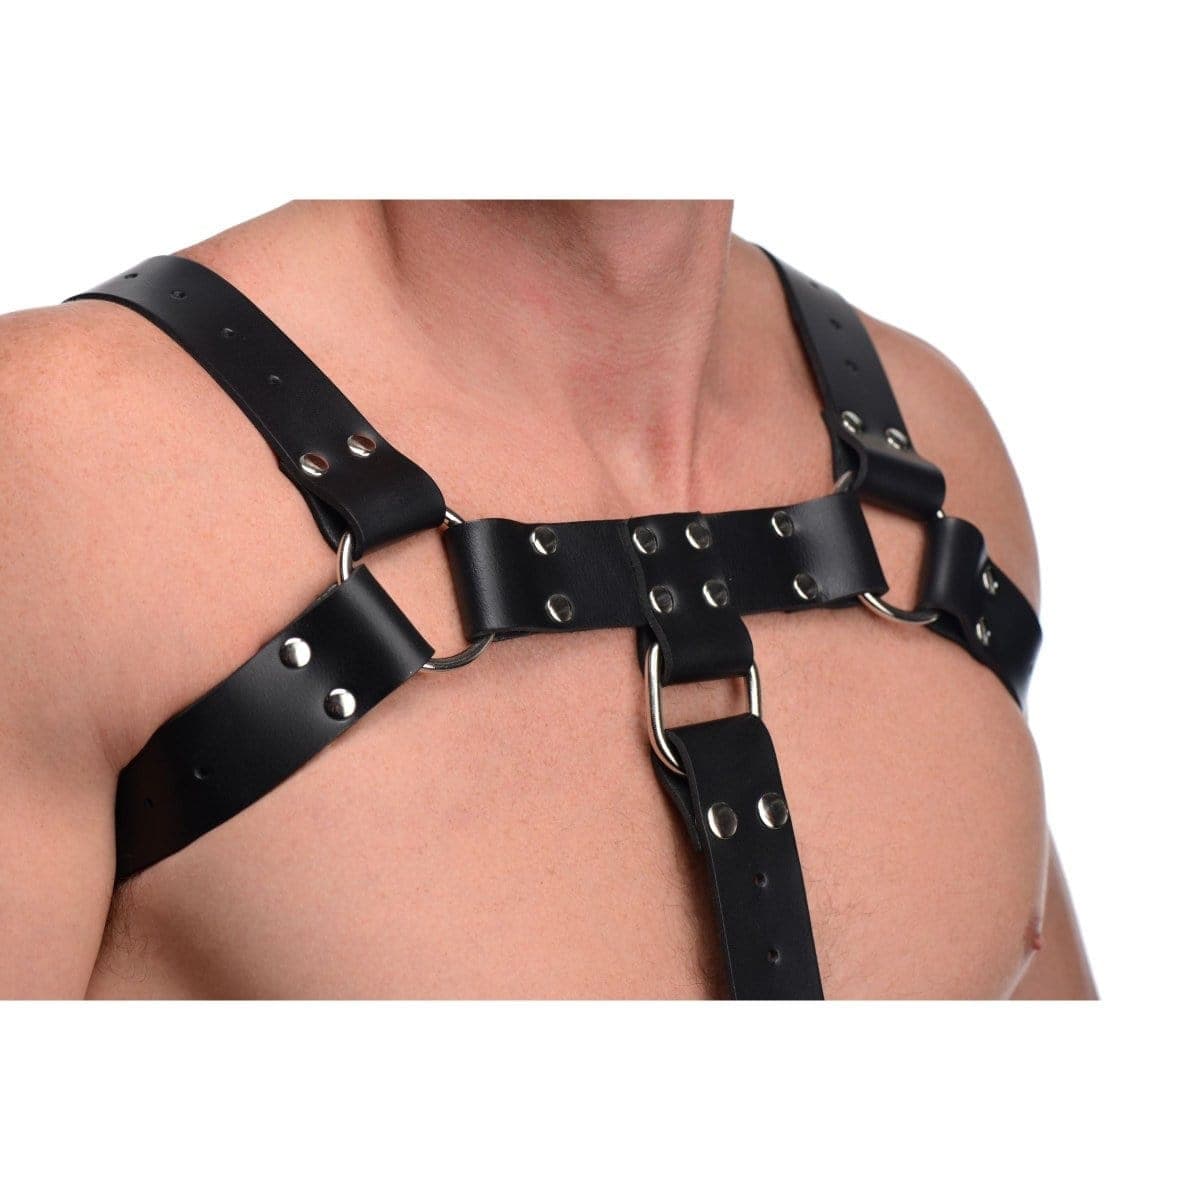 Strict Leather Harness English Bull Dog Harness With Cock Strap at the Haus of Shag